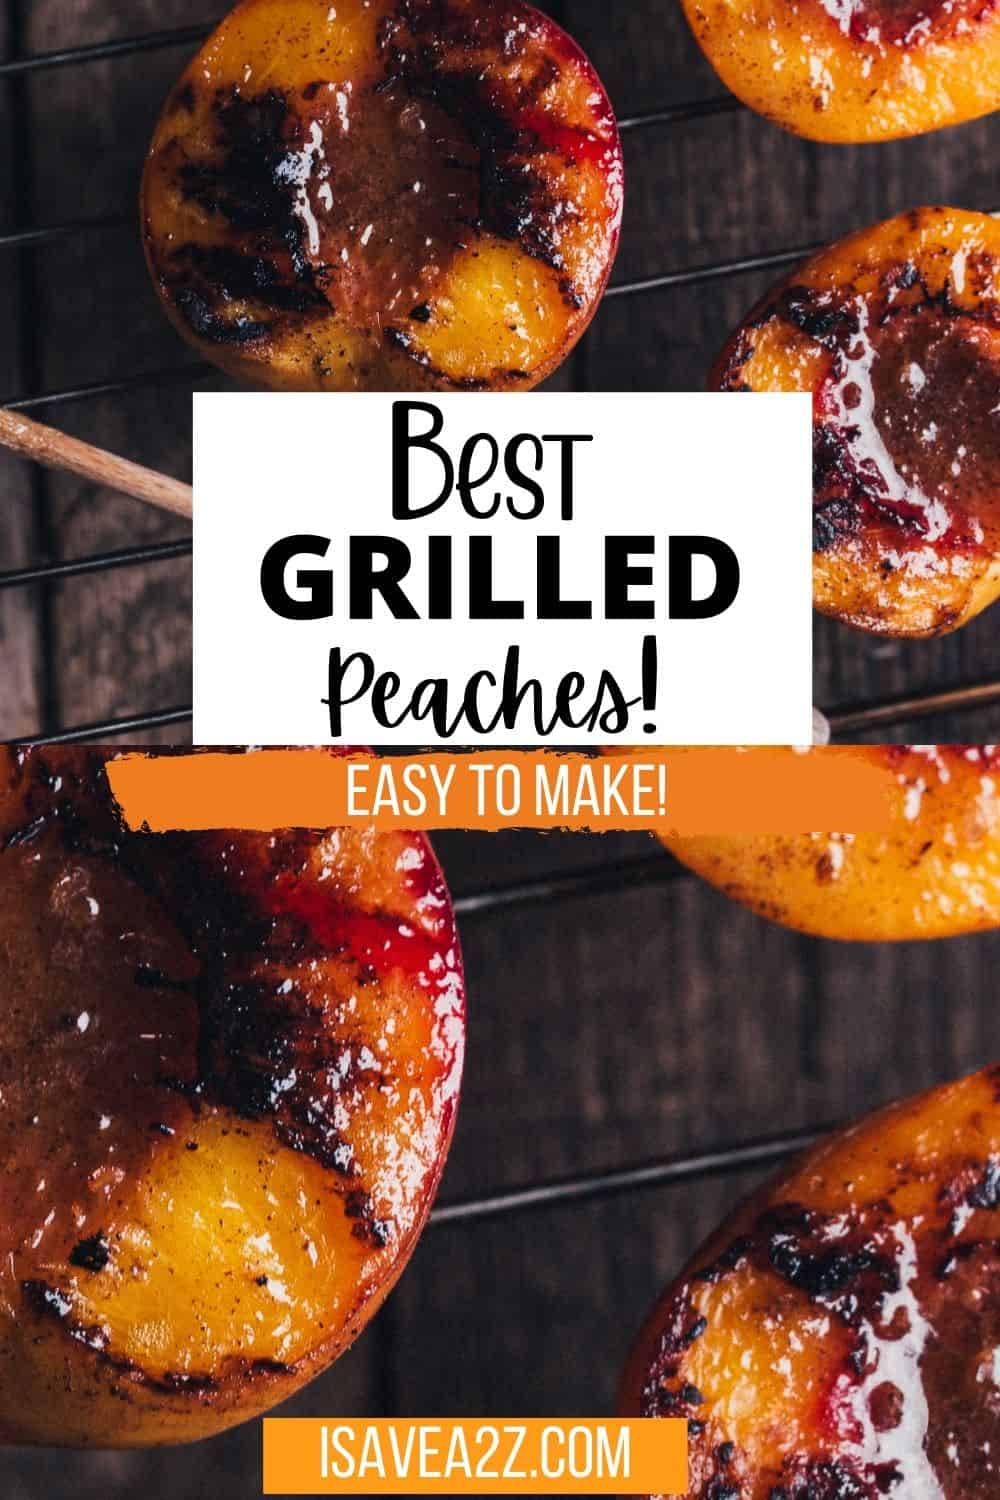 How to Grill Peaches the easy way